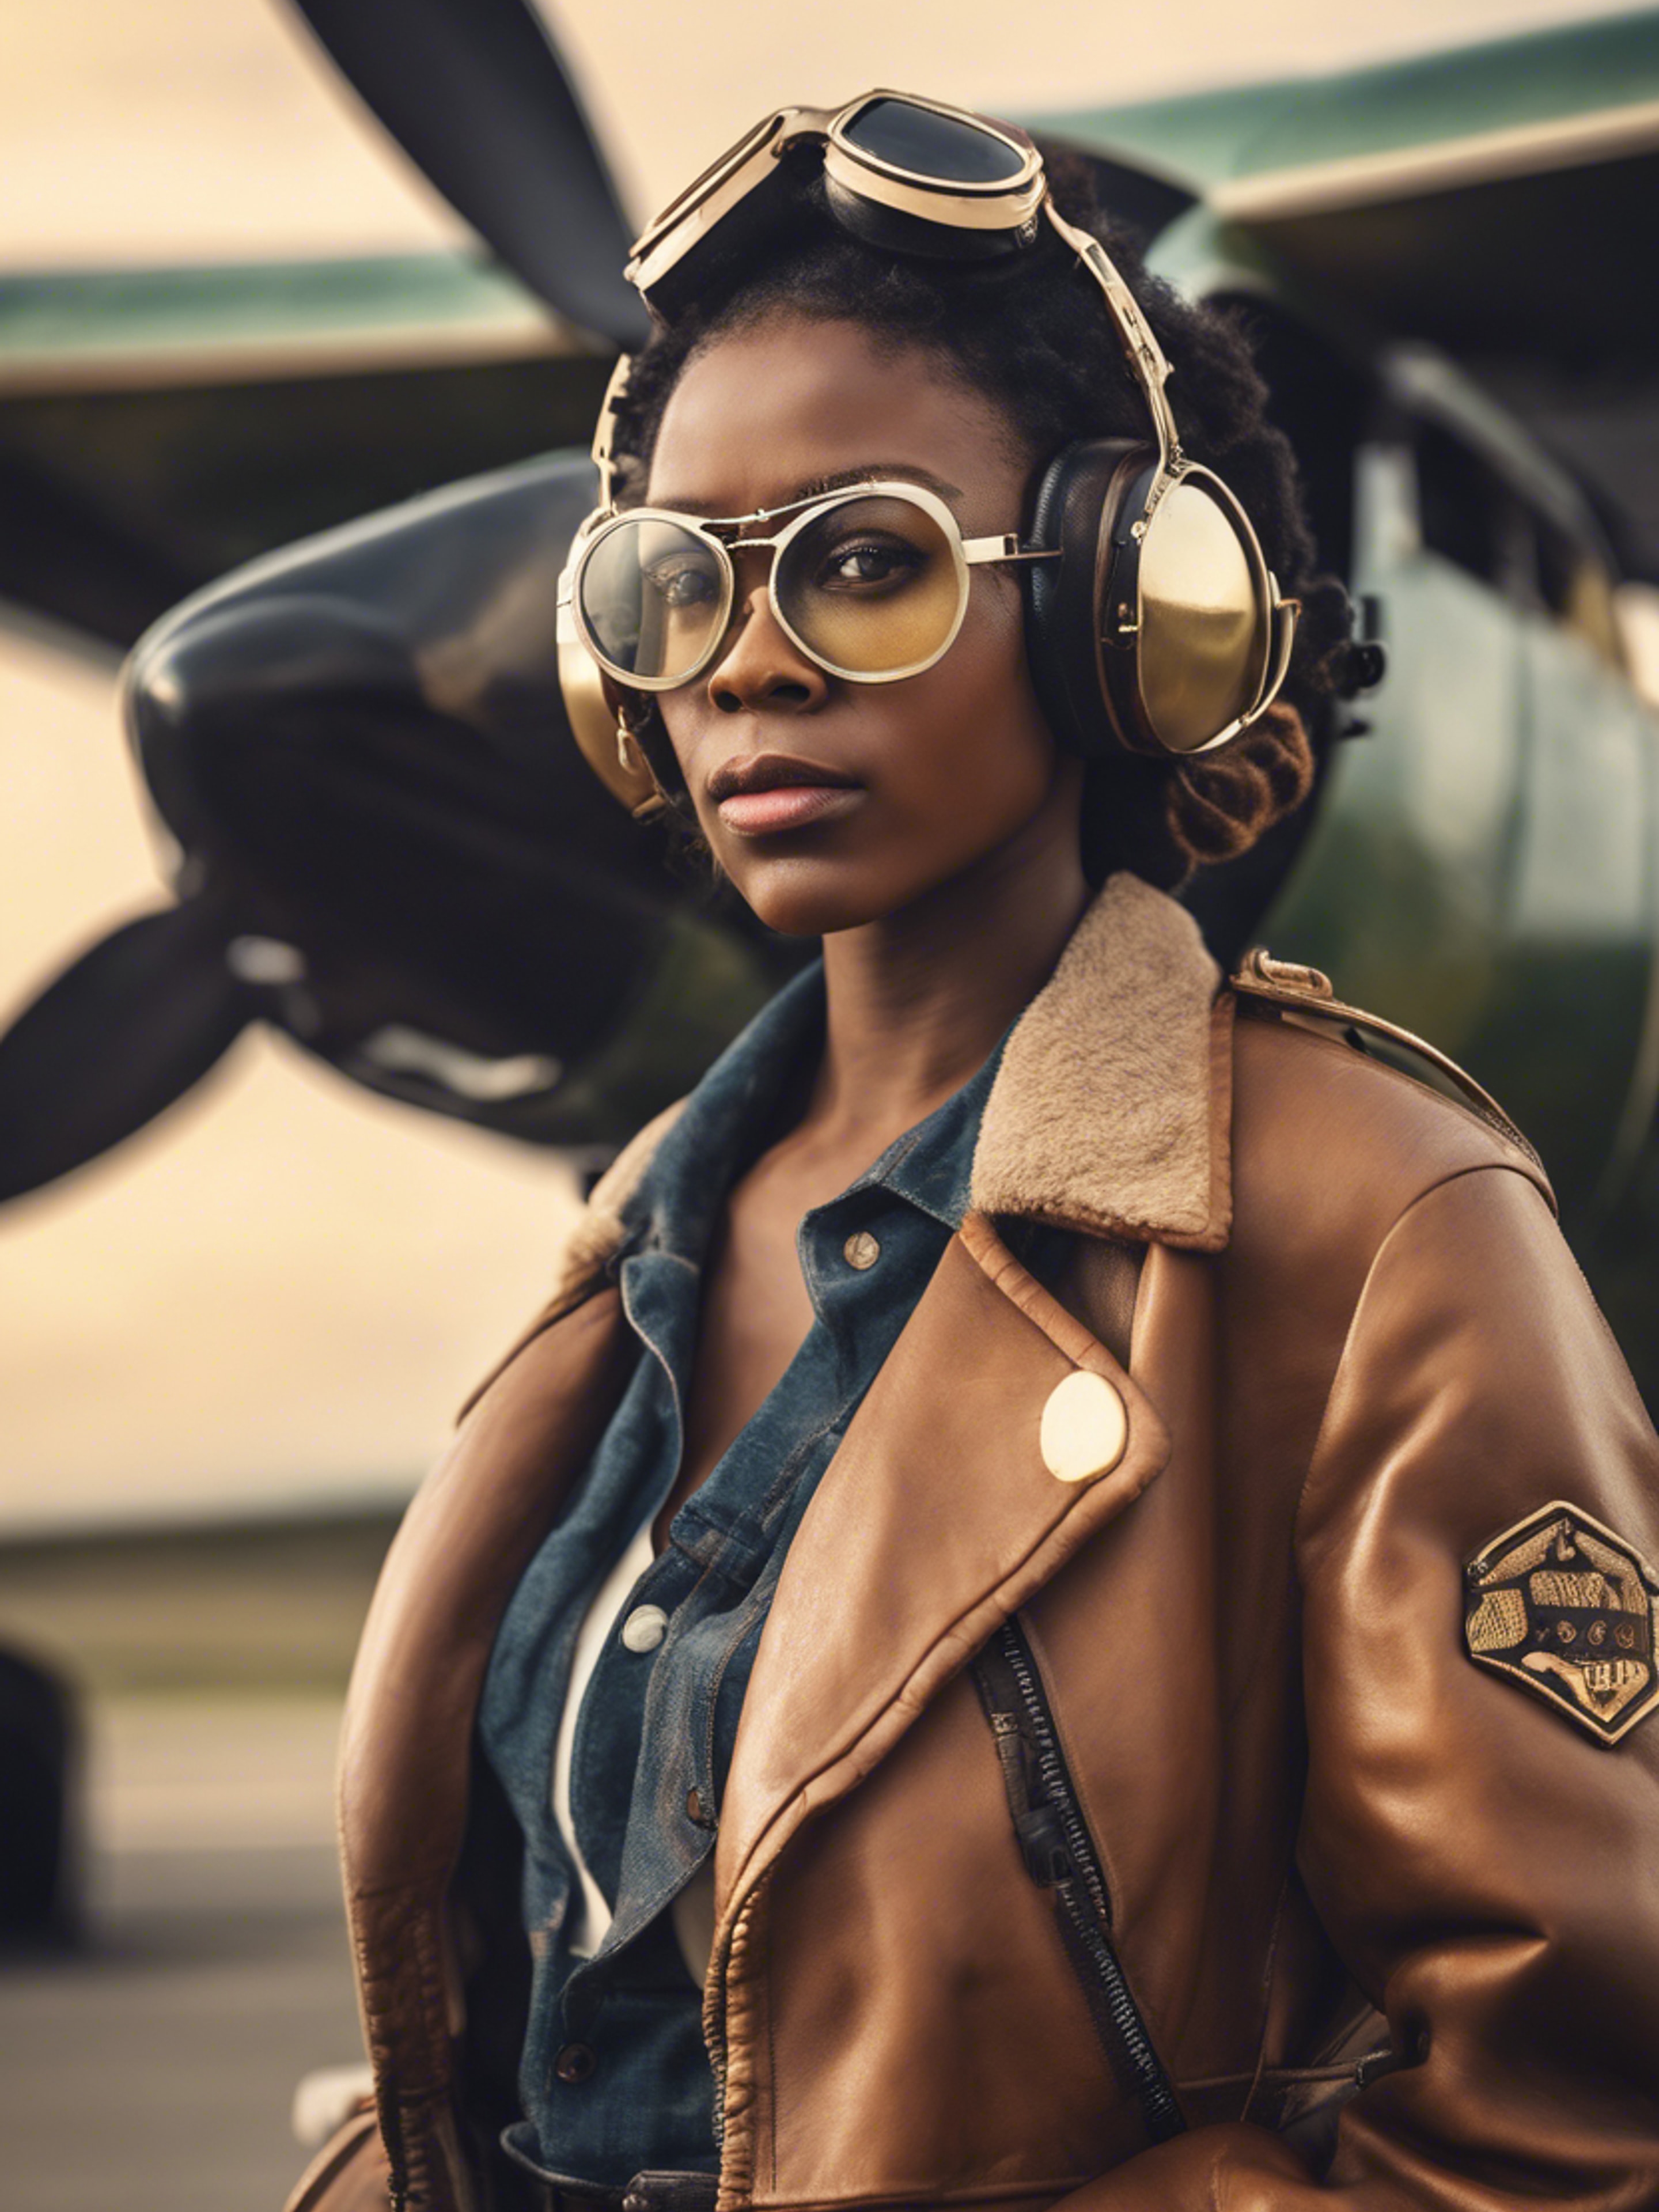 A black girl in an aviator jacket and goggles flying a retro propeller plane. Тапет[82958076c6f747e0ac9d]